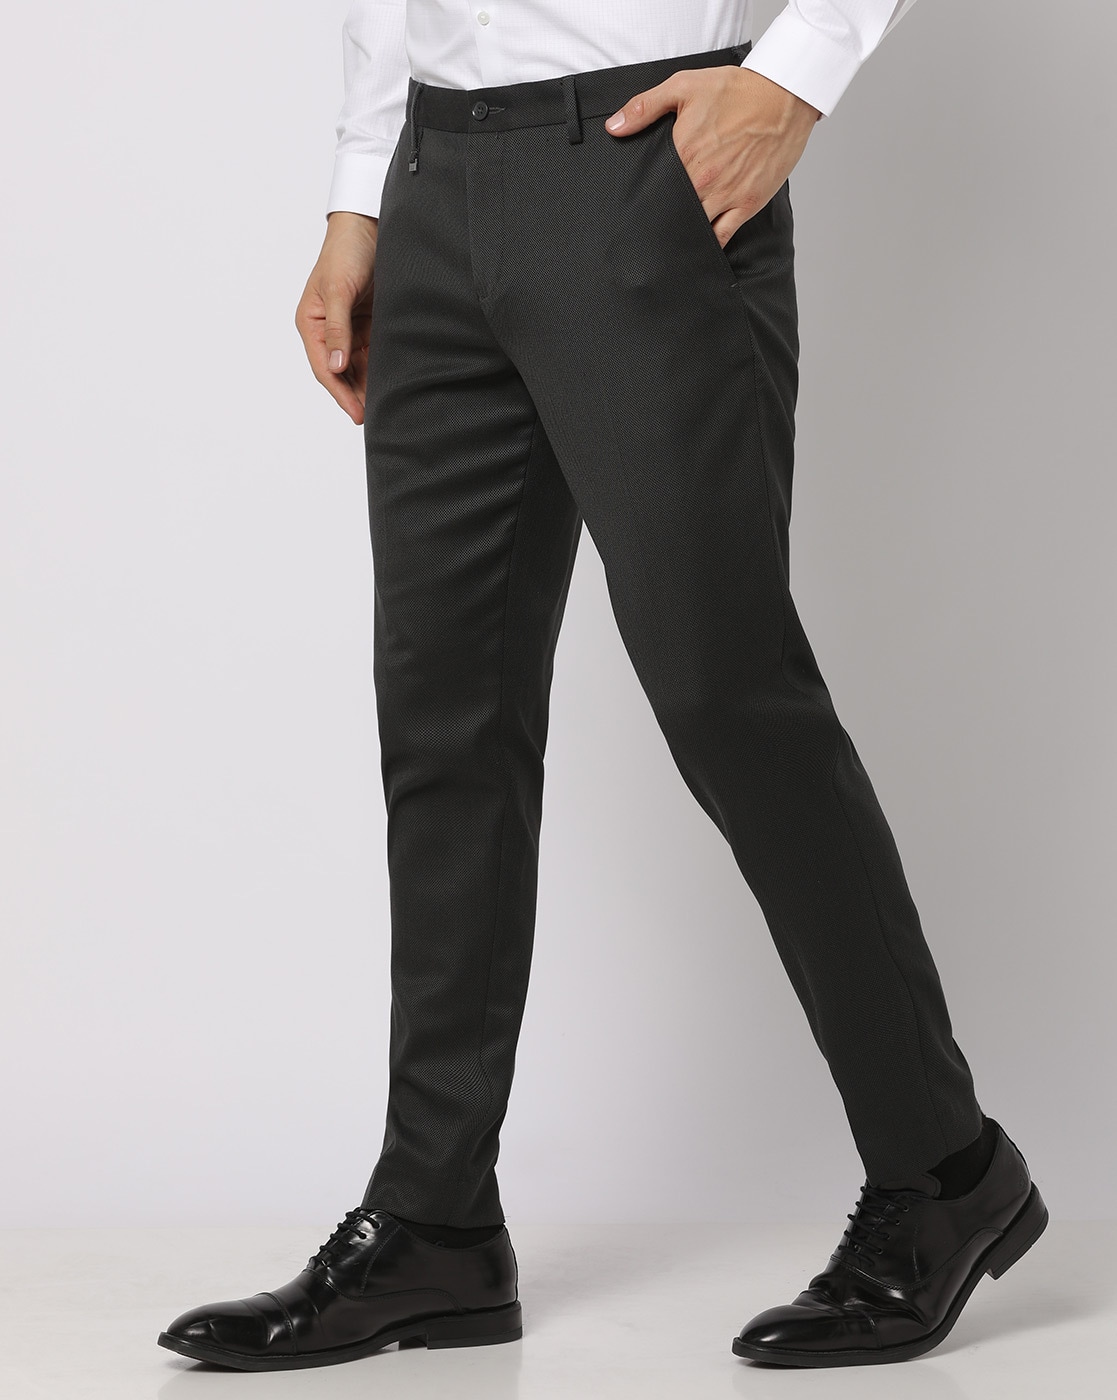 Buy INTUNE Charcoal Grey Slim Fit Stretch Formal Pants  Shoppers Stop